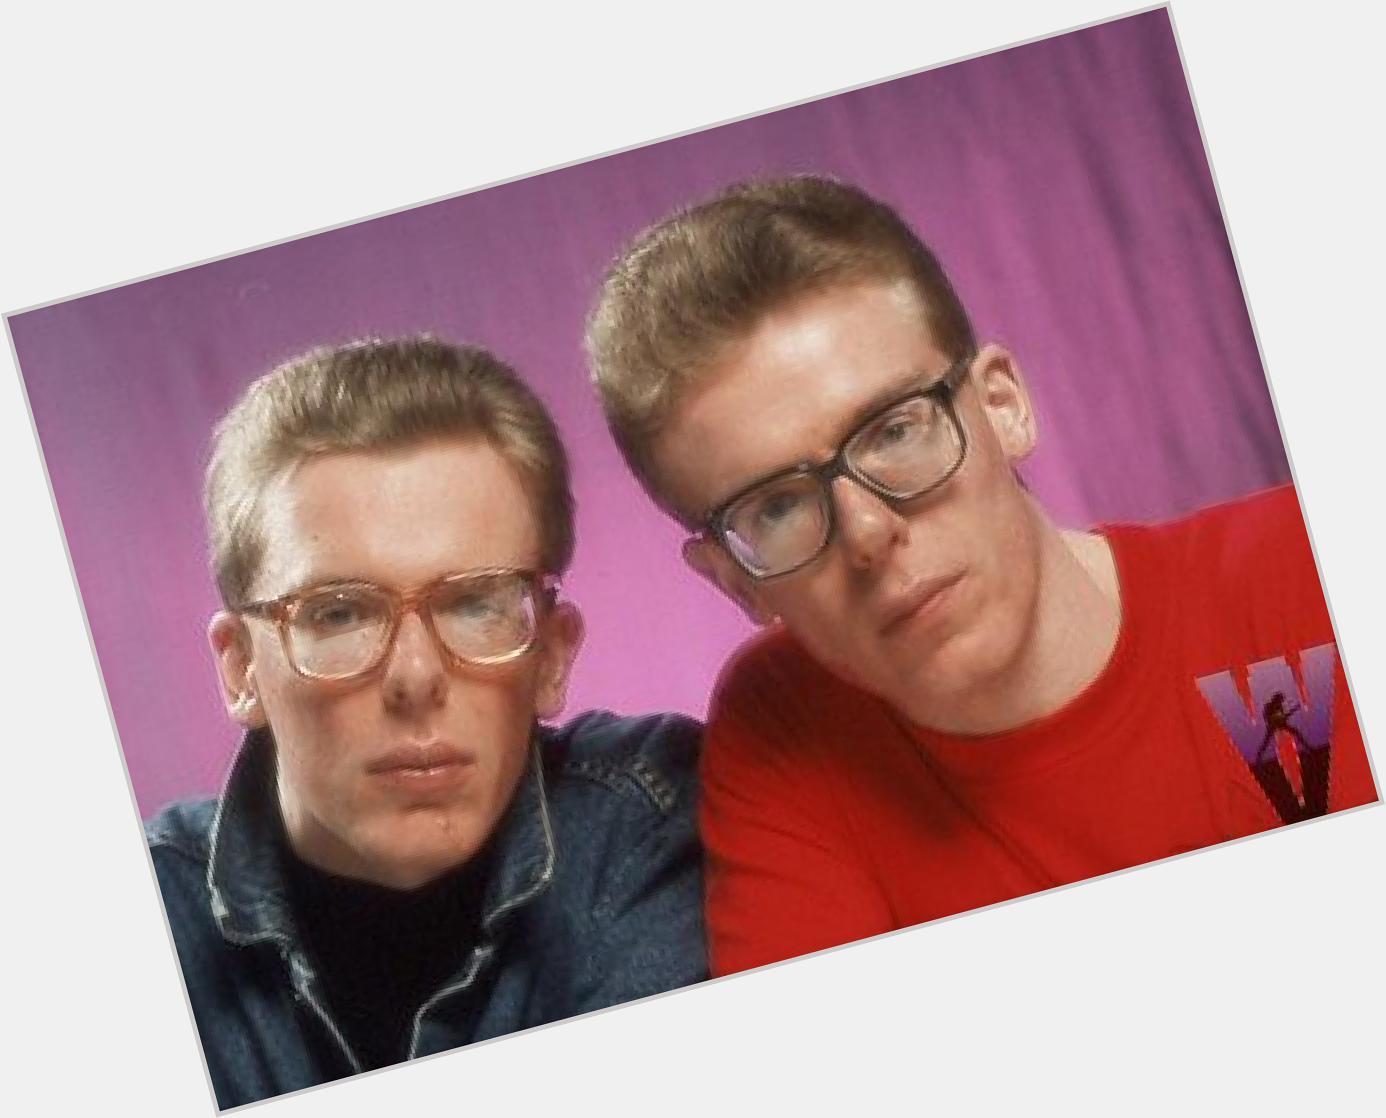 <a href="/hot-men/the-proclaimers/is-he-brothers-irish-married-what-new-song">The Proclaimers</a>  